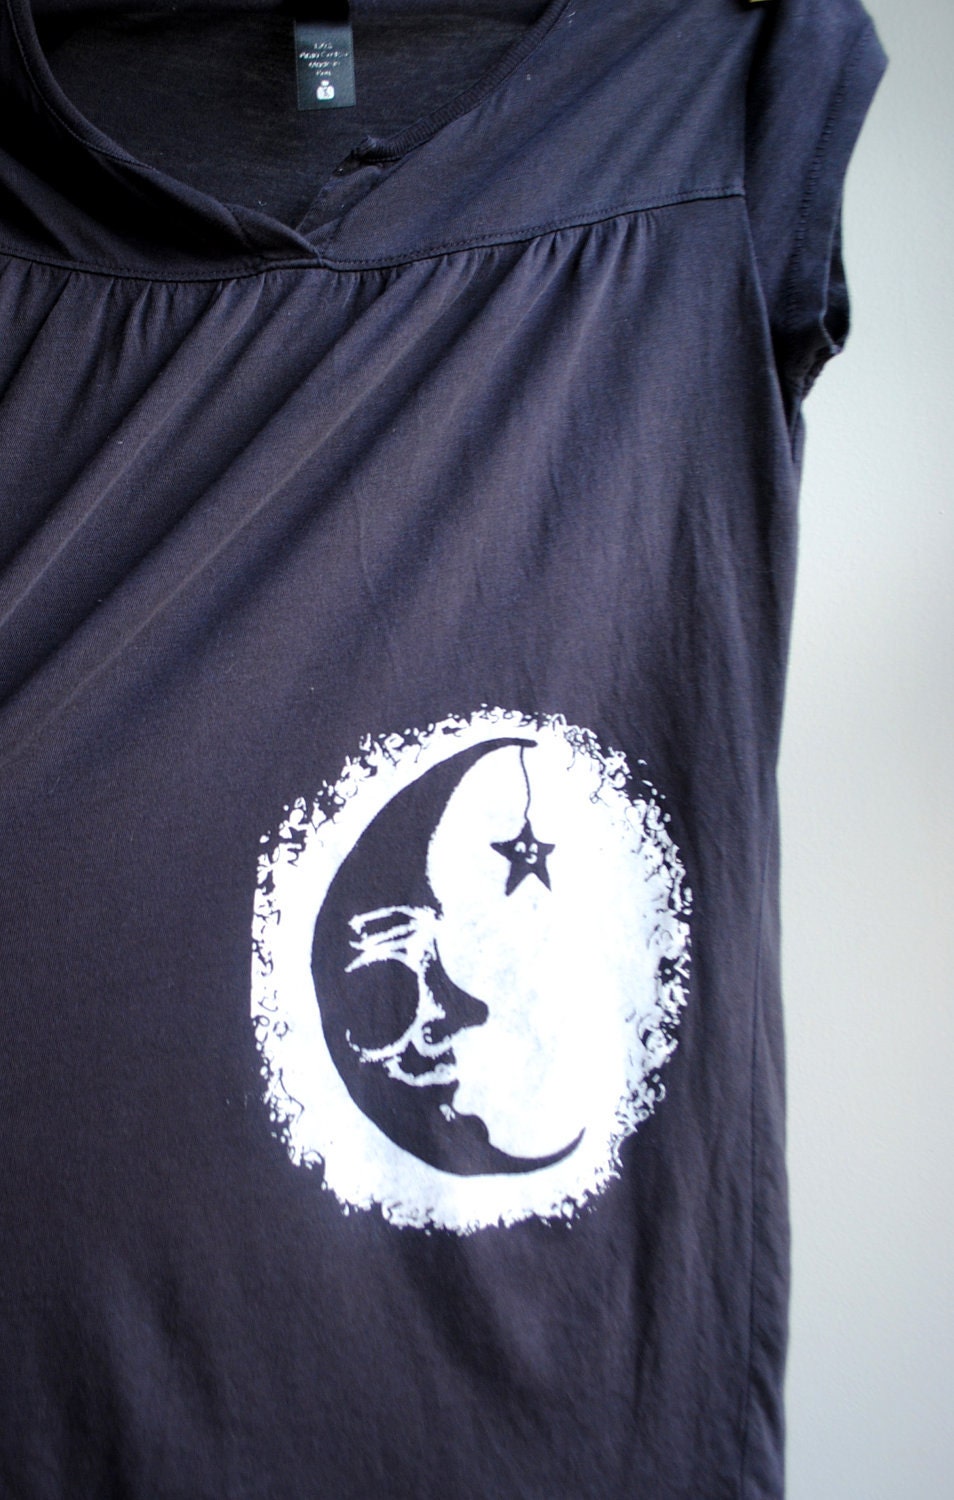 Man in the Moon with Twinkling Star Screen Printed Babydoll Shirt, Charcoal with White Ink, Womens Small